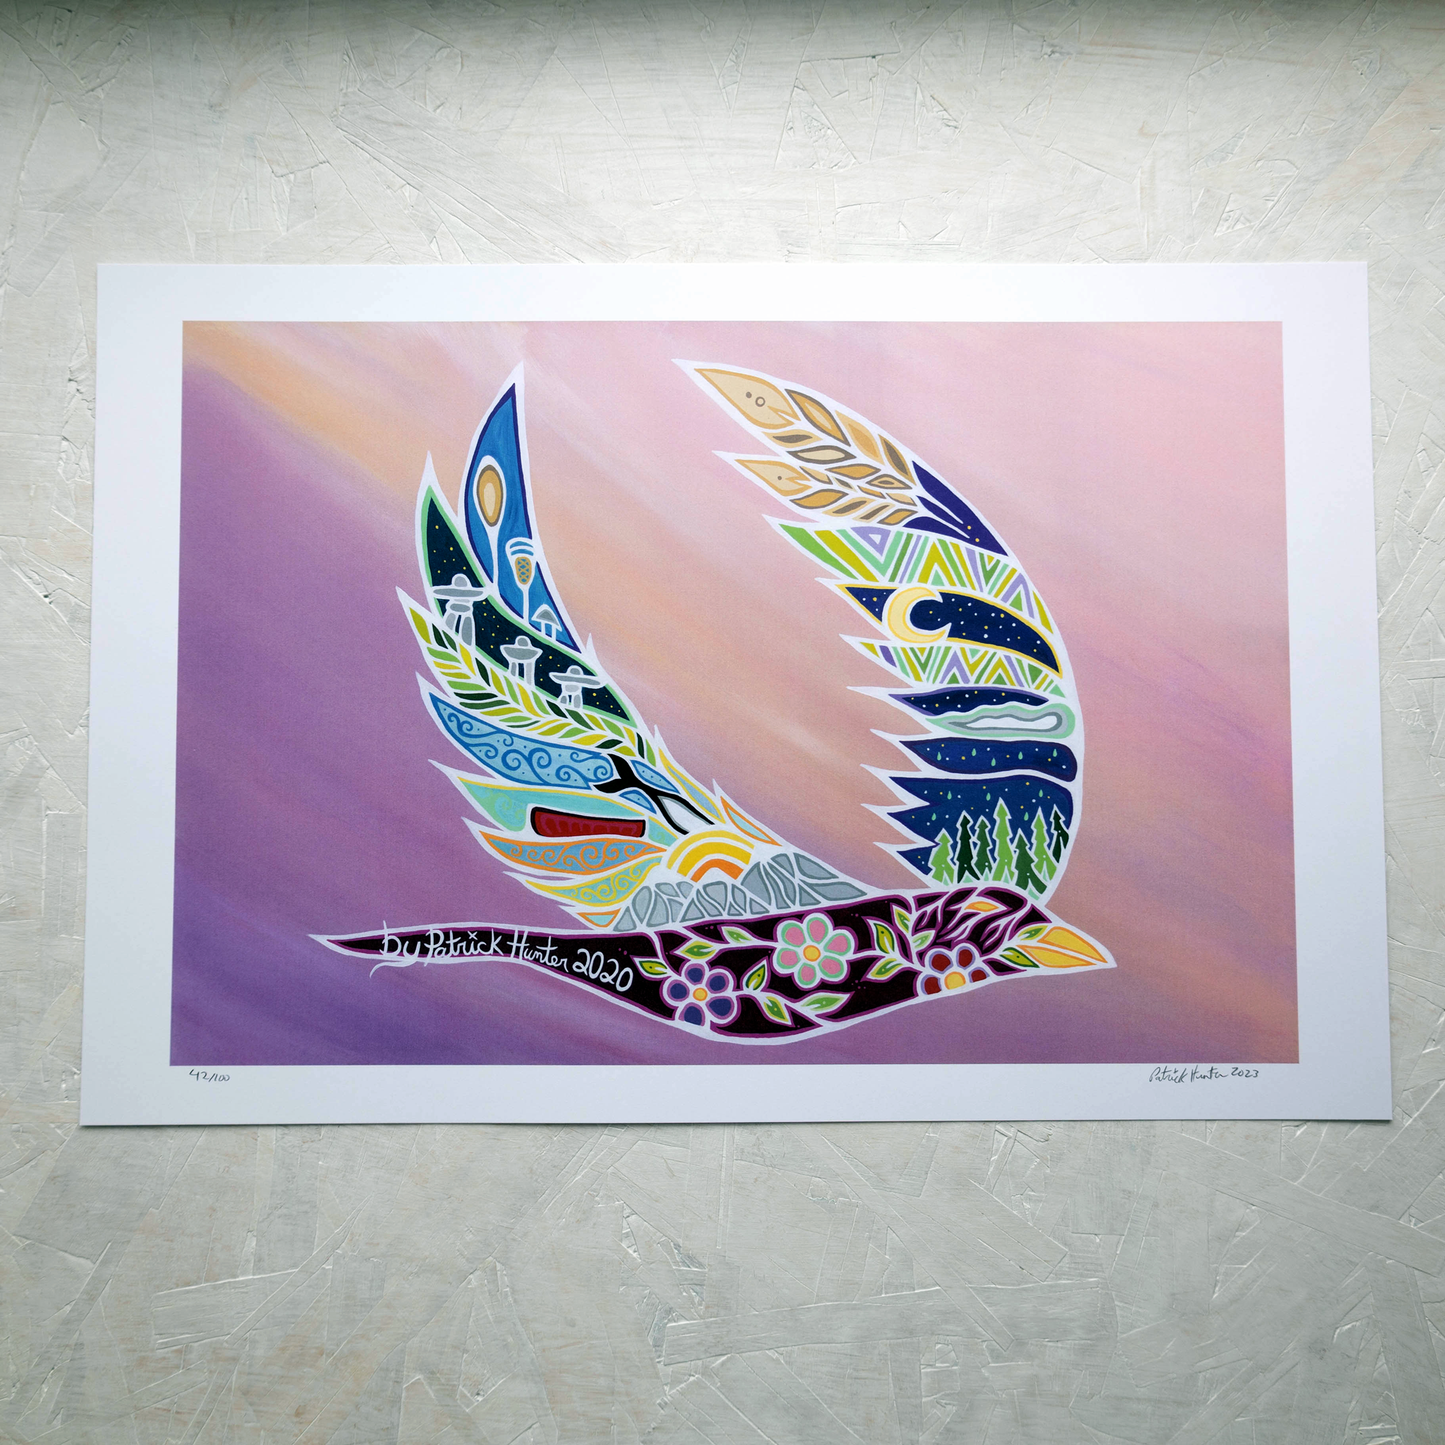 Print of Patrick Hunter's painting of a bird in flight with various landscapes and cultural icons in the wings, in woodland art style.